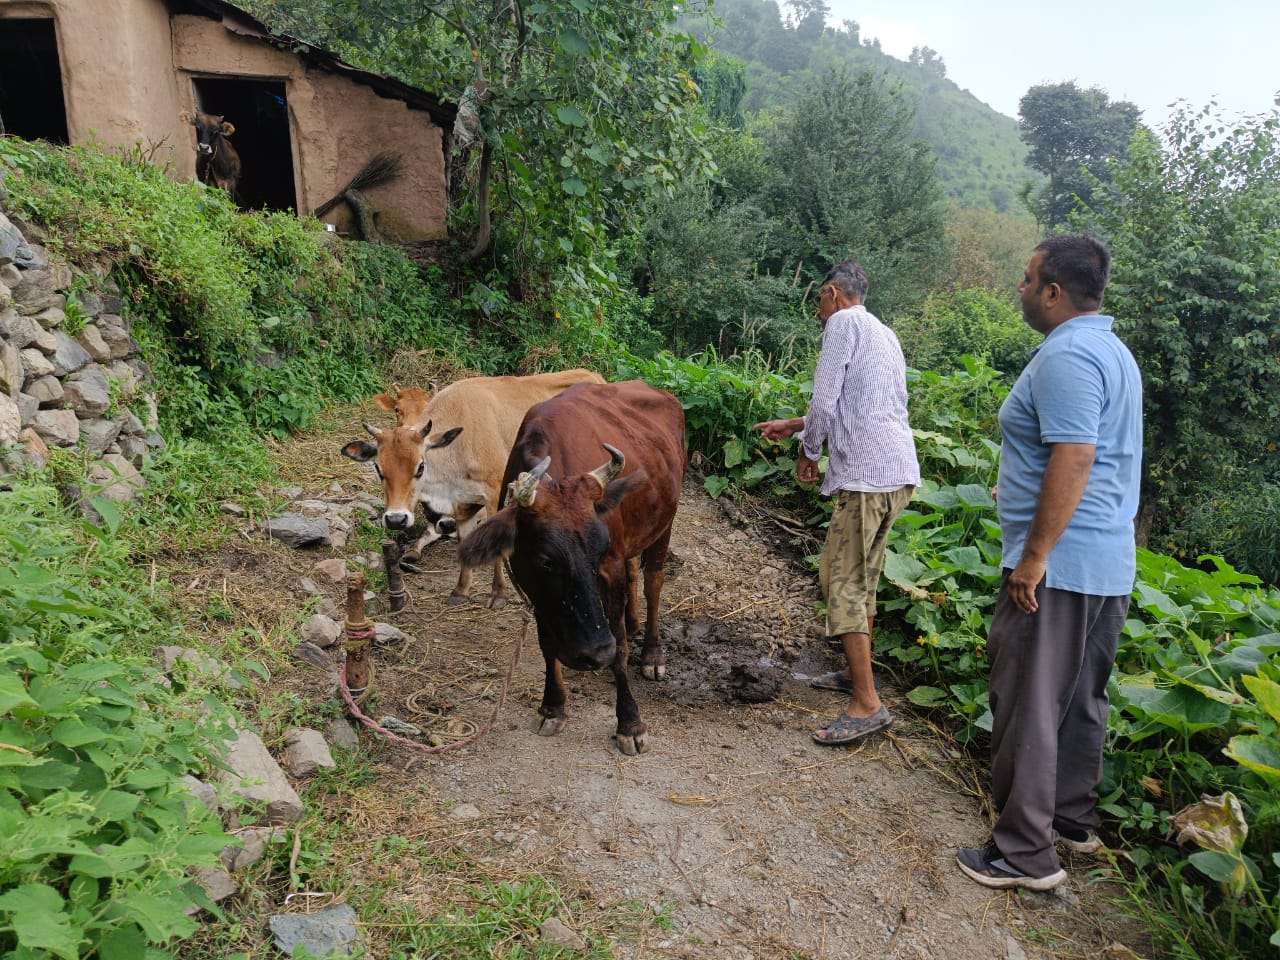 Cattle Owner with affected animal